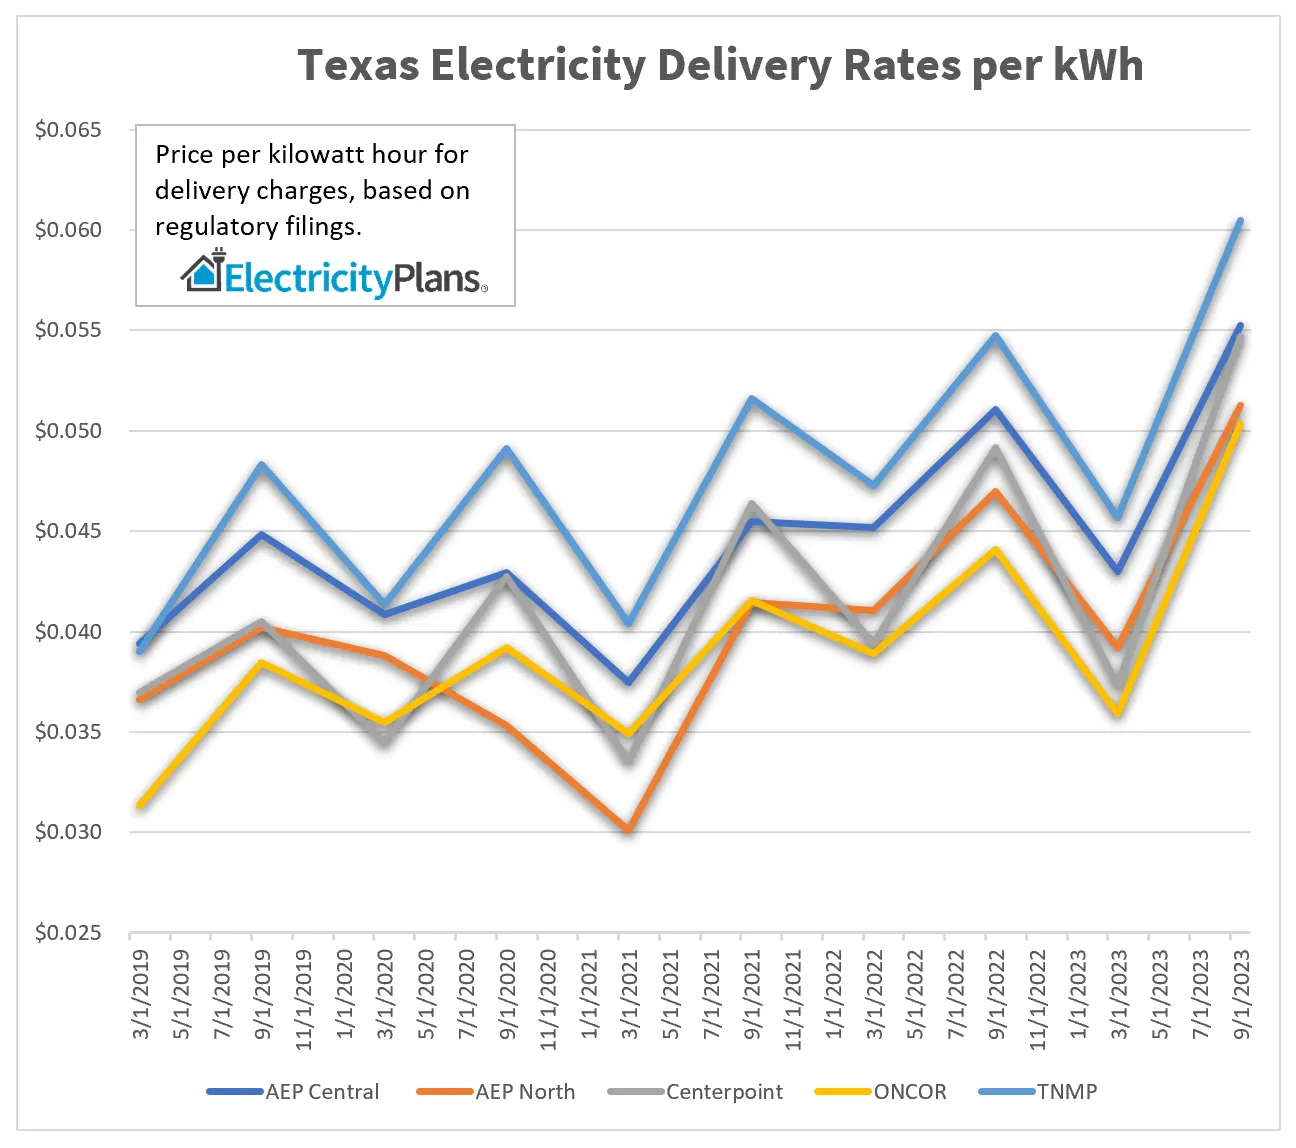 texas electricity delivery rates trend chart for 2017 - 2023
